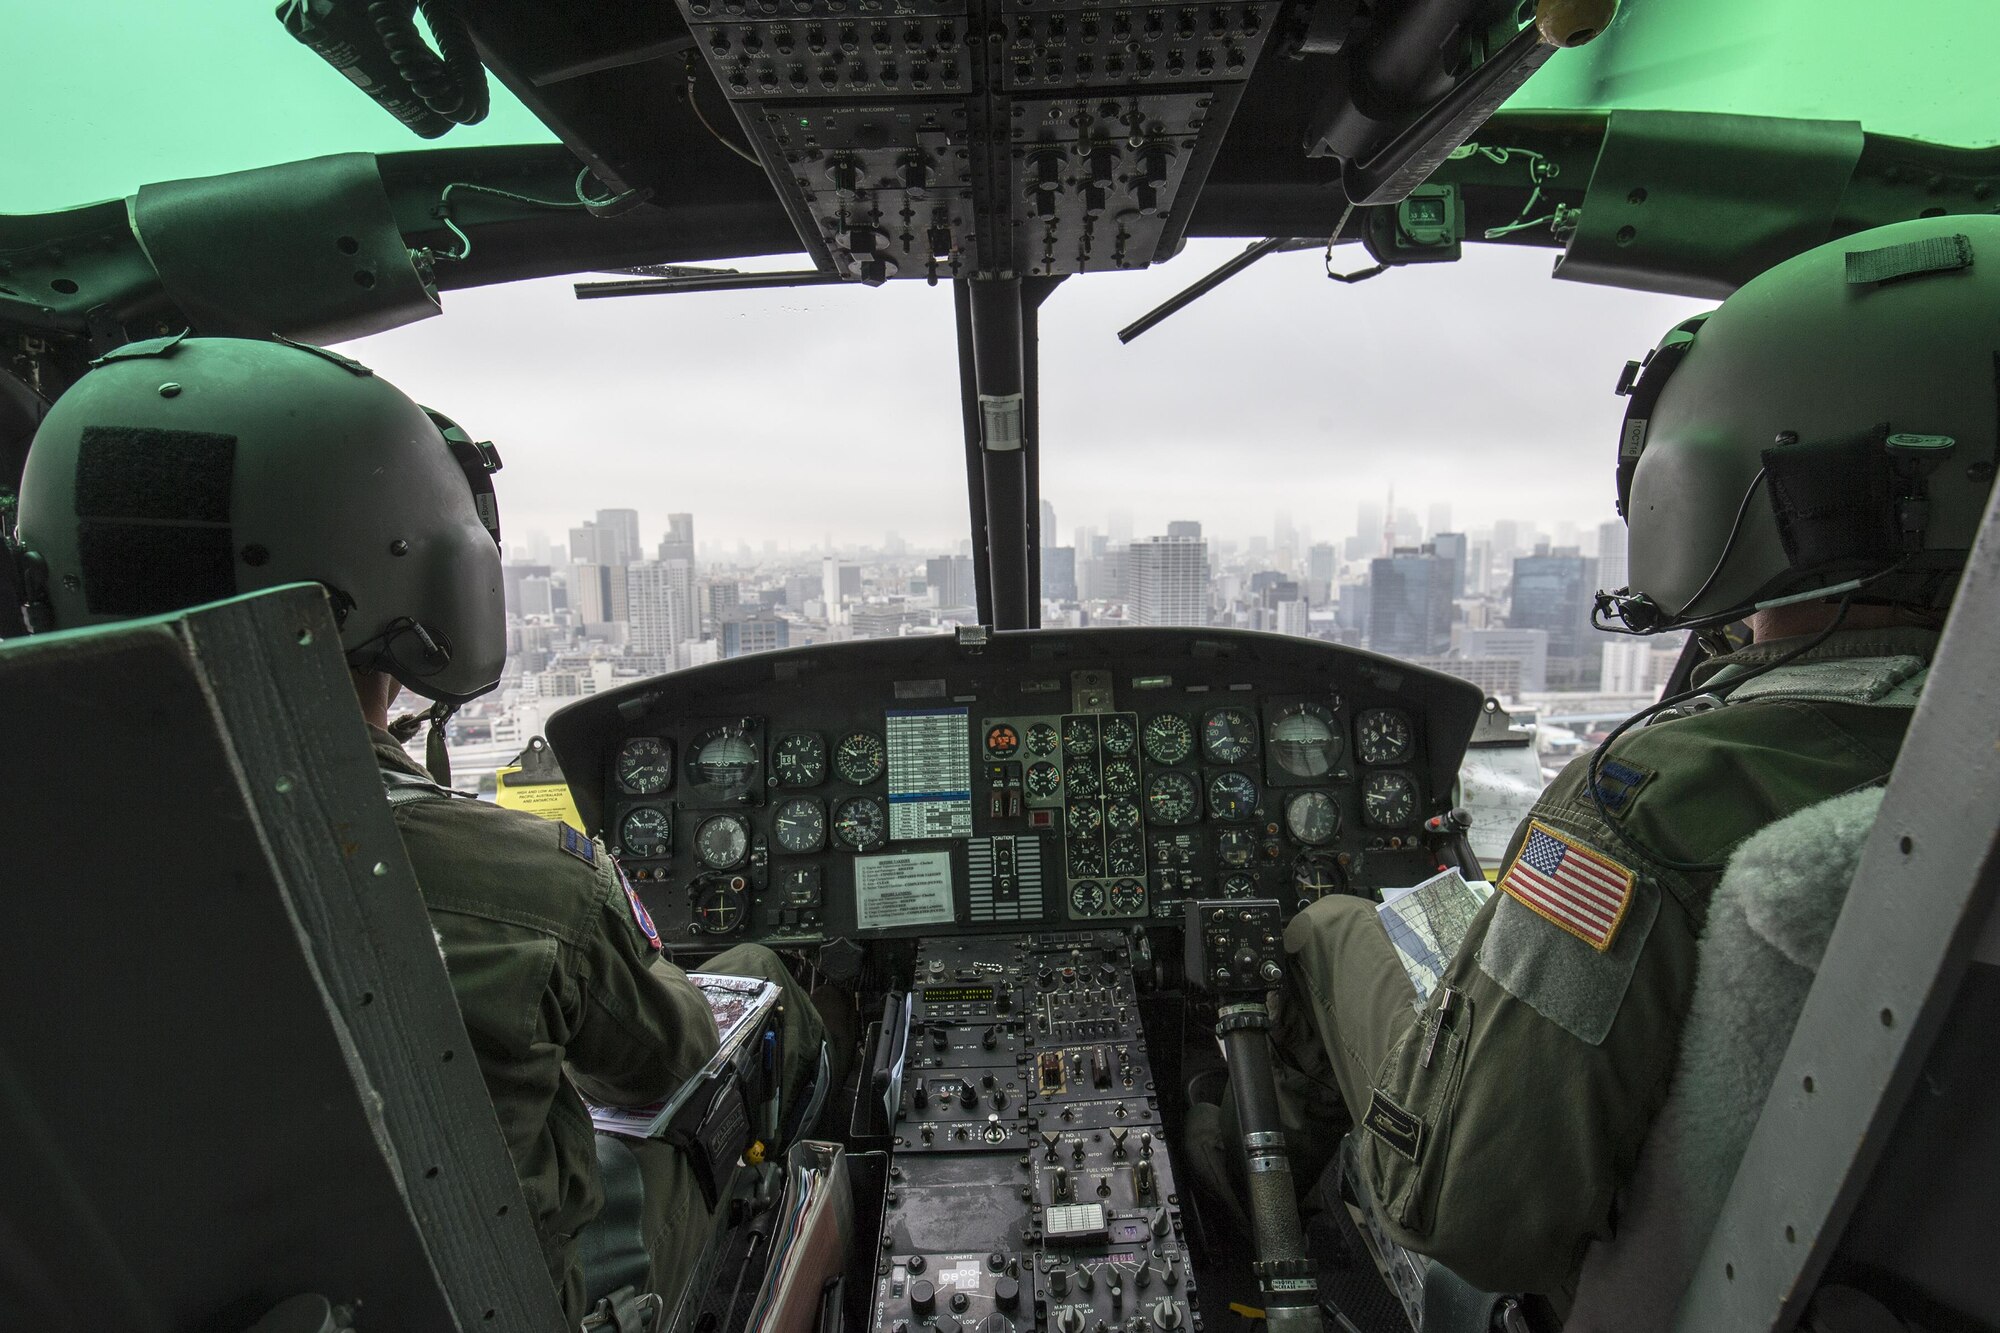 Capt. Jonathan Bonilla and Capt. Vicente Vasquez, 459th Airlift Squadron UH-1N Iroquois pilots, fly over Tokyo metropolis, Sept. 4, 2016. Airmen with the 459 AS delivered simulated disaster relief supplies to the Tokyo Rinkai Disaster Prevention Park during annual Tokyo Metropolitan Government Disaster Management Drill. The park is located in the Ariake area and is a disaster countermeasure headquarters of the Government of Japan and other local governments during large-scale earthquakes in the metropolitan area. (U.S. Air Force photo by Yasuo Osakabe/Released) 